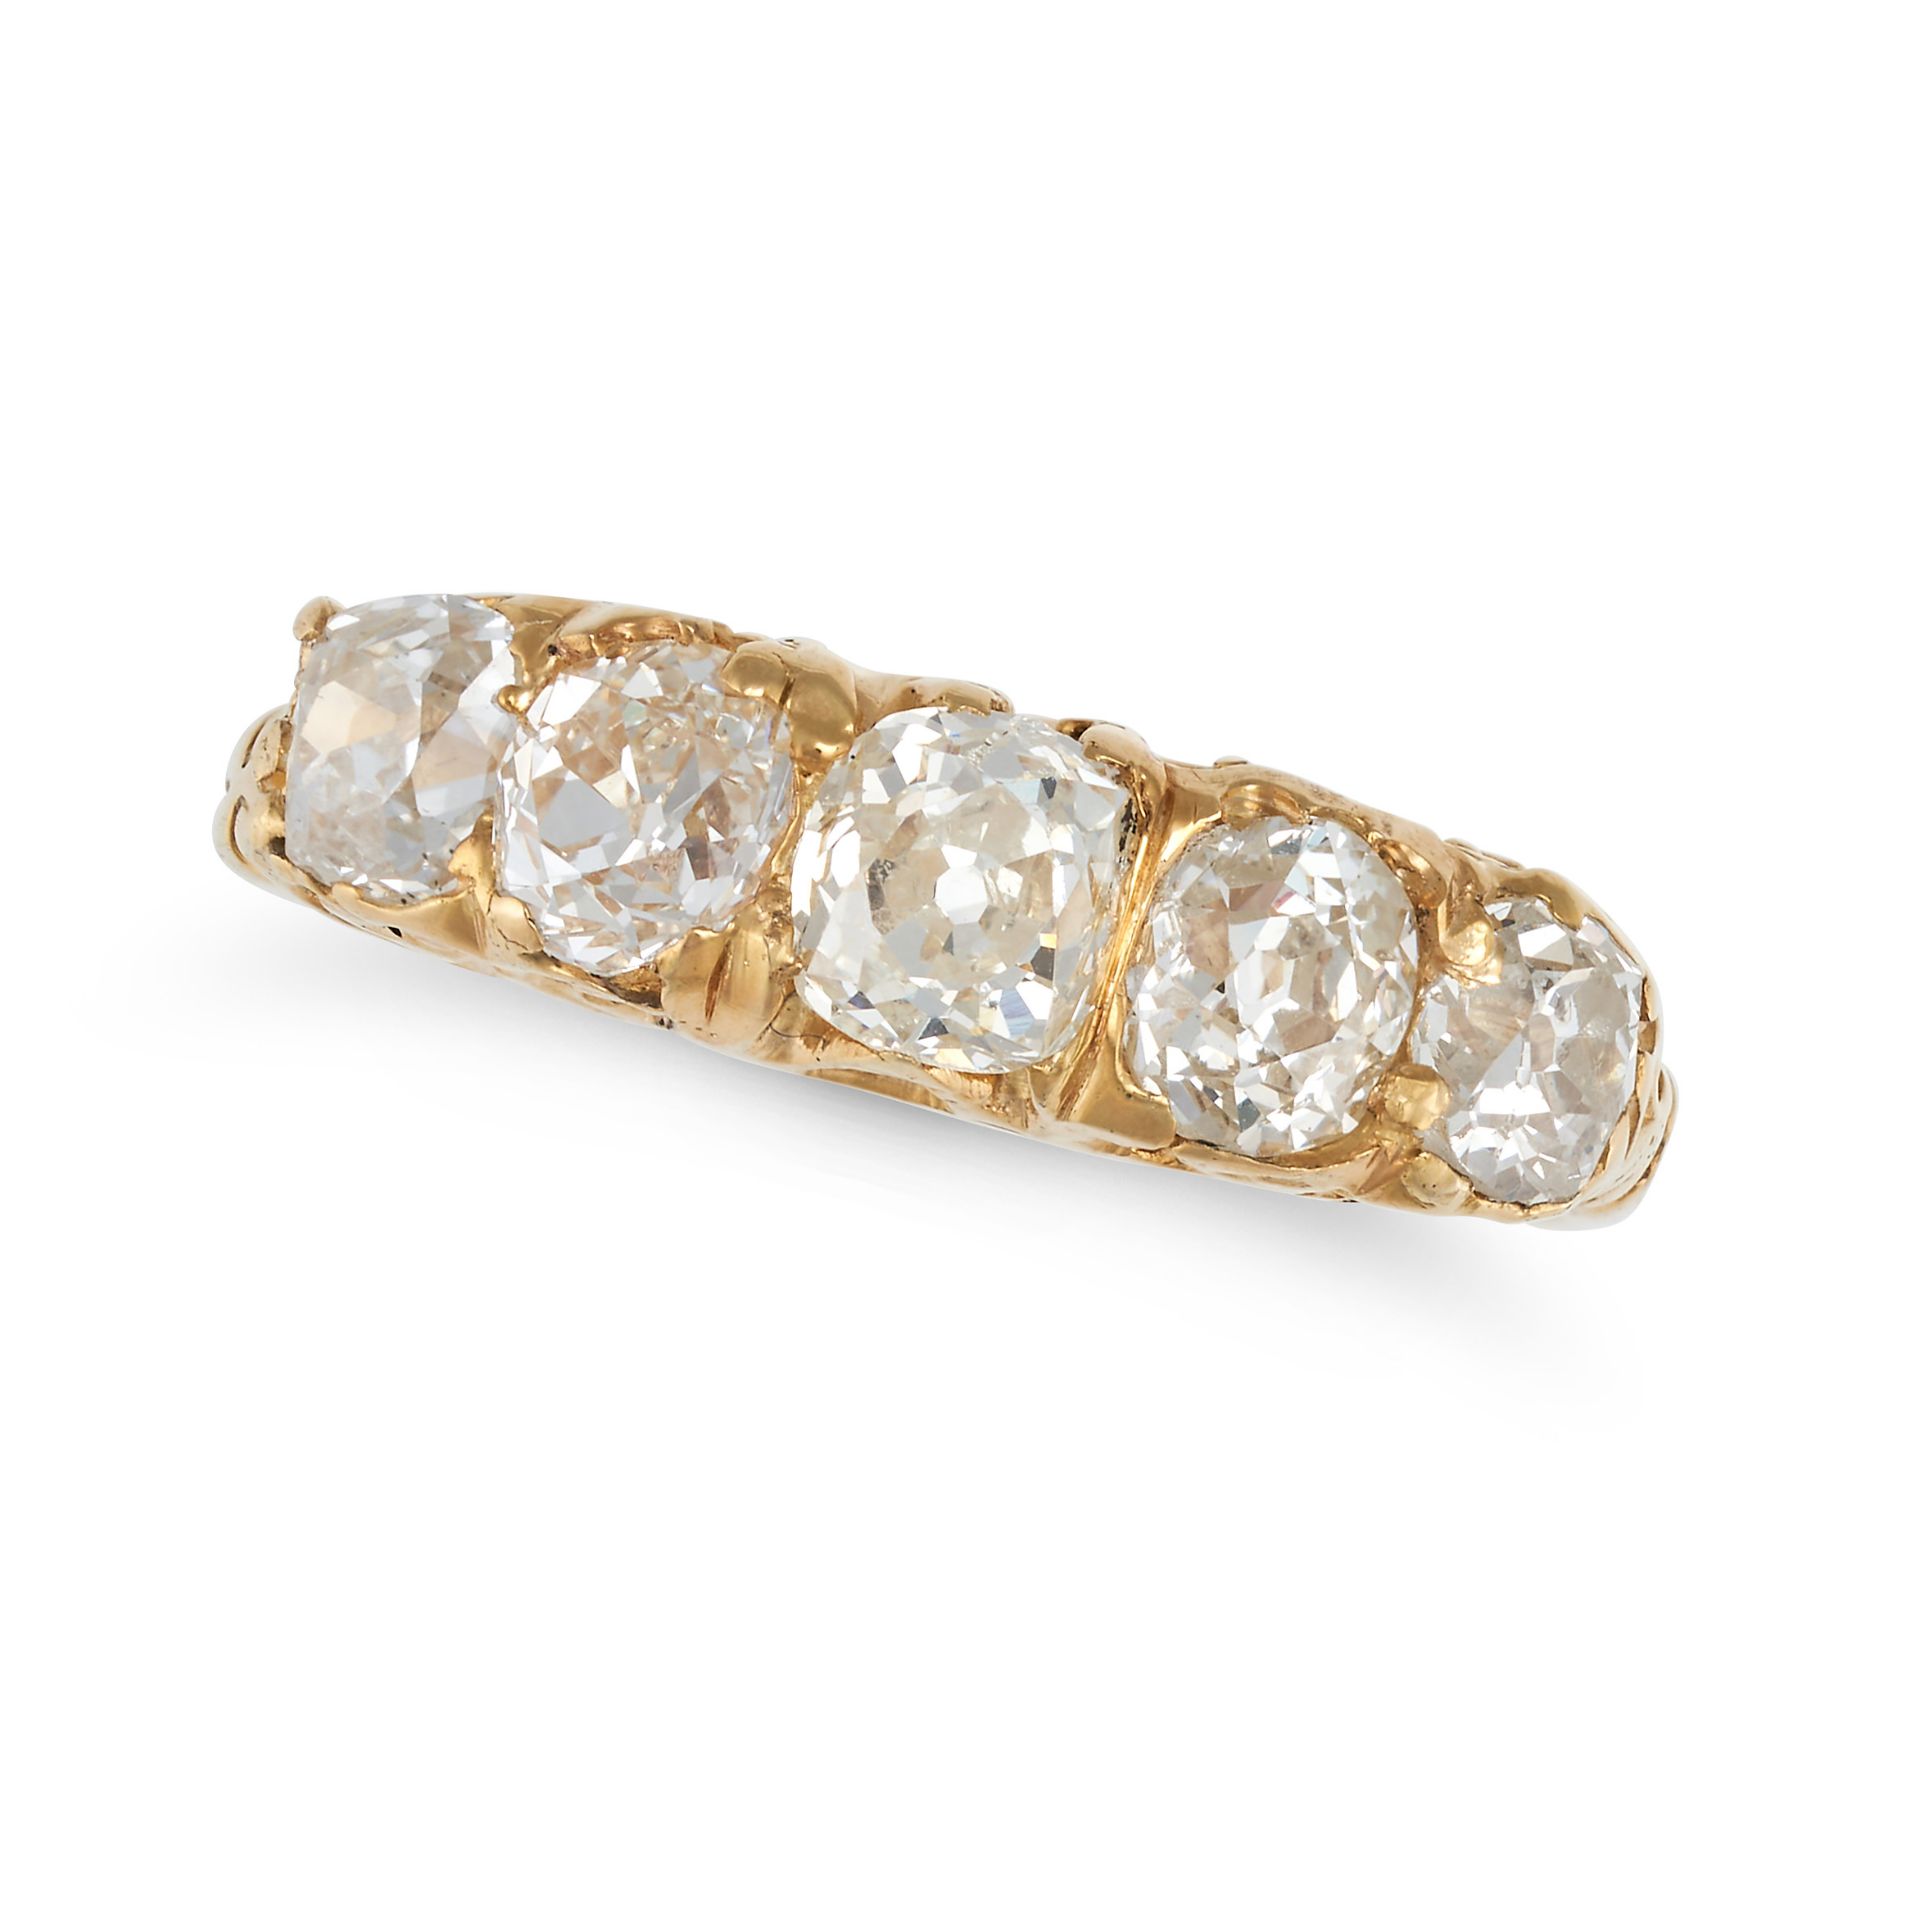 AN ANTIQUE FIVE STONE DIAMOND RING in yellow gold, set with five old cut diamonds, the diamonds a...